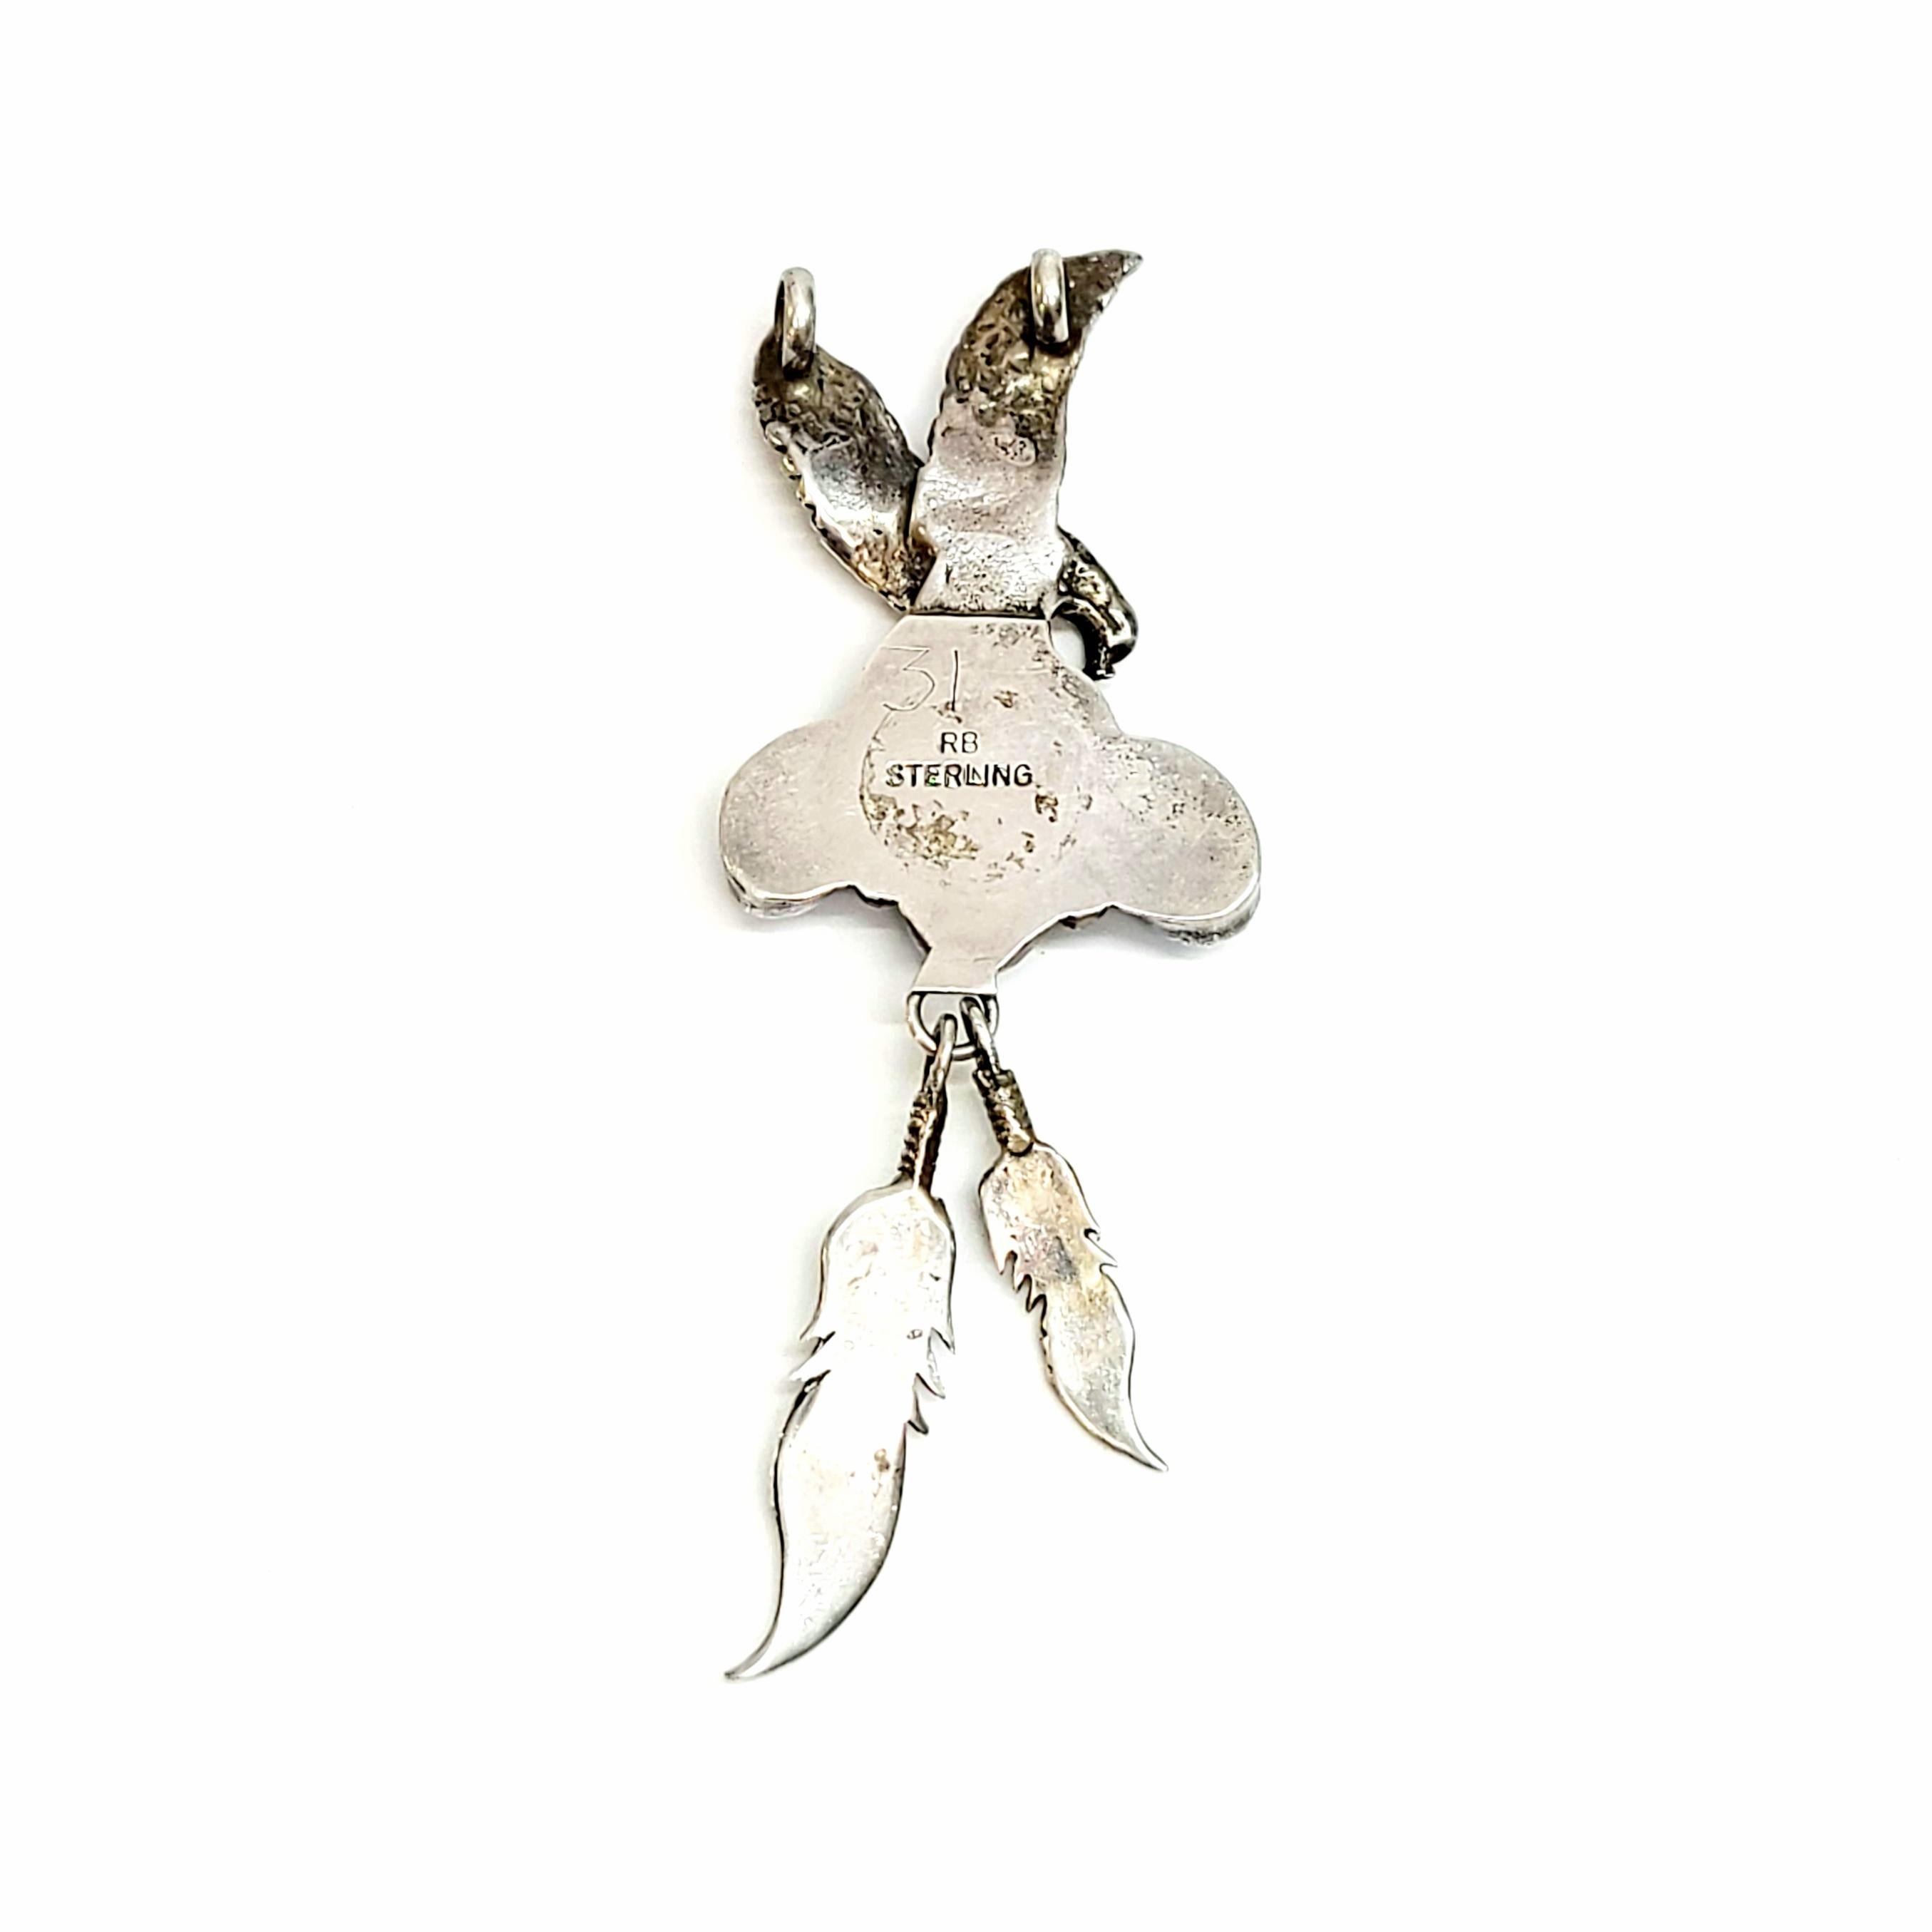 Sterling silver and turquoise eagle pendant by Native American Navajo artisan, Richard Begay.

Richard Begay was a seasoned Native American artisan whose work has been featured in the Smithsonian. He worked mostly with turquoise and coral and